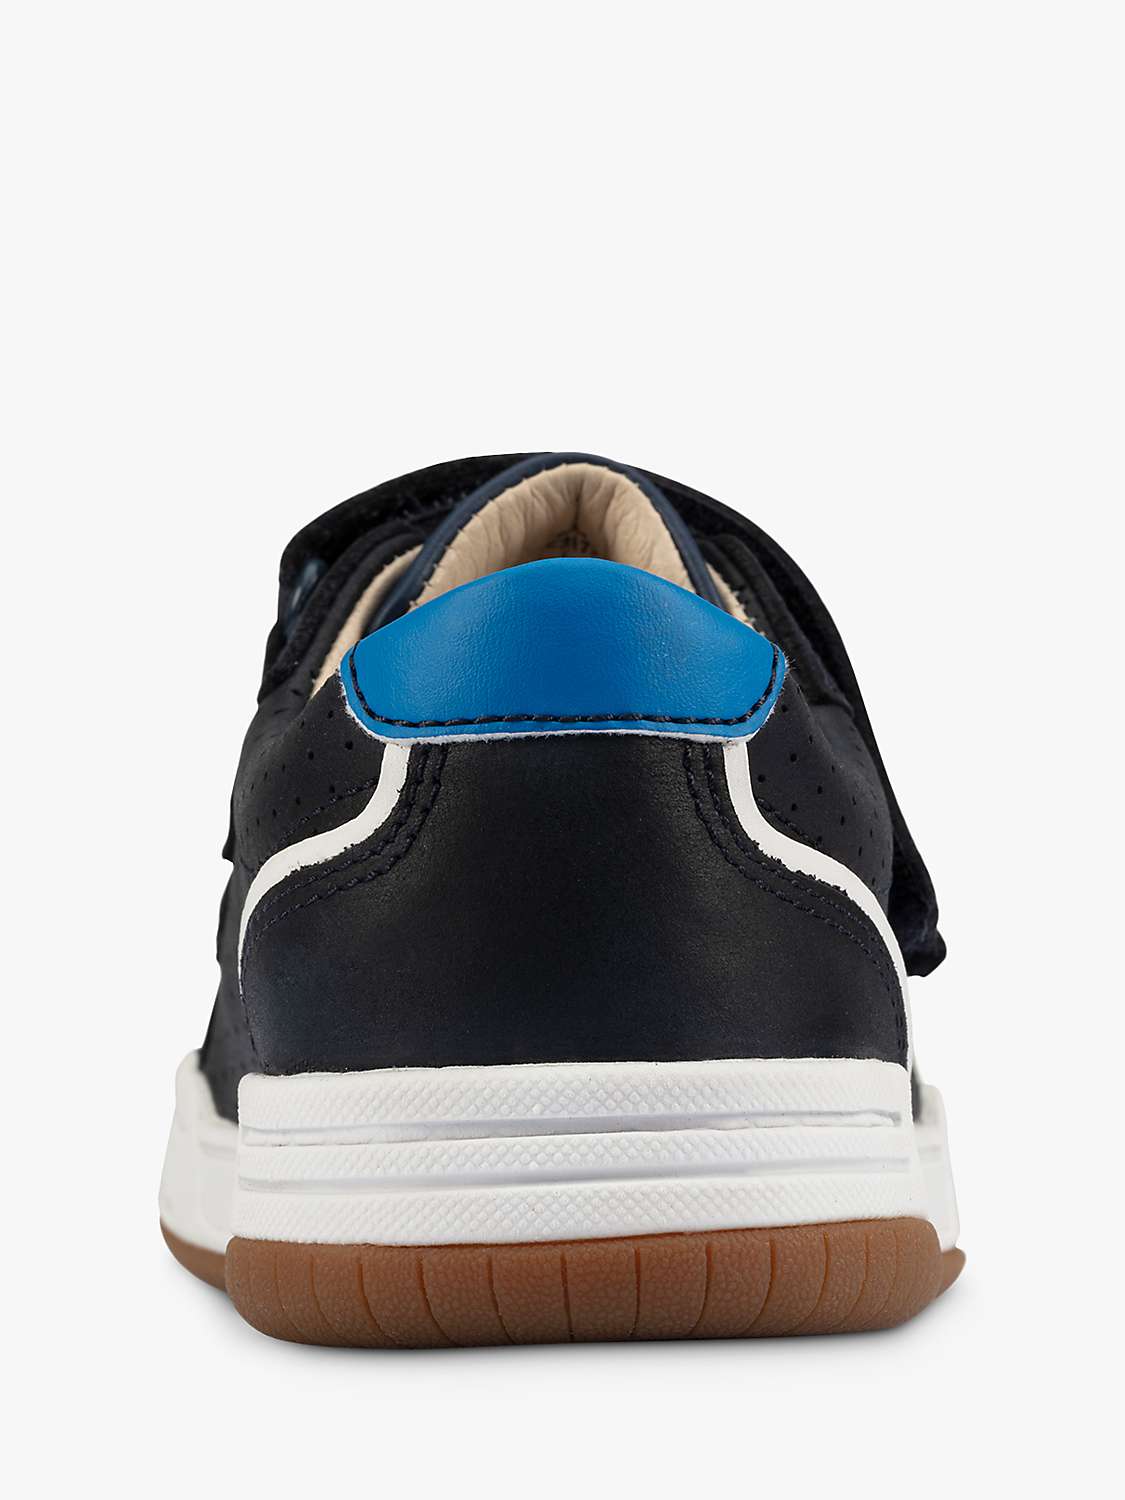 Clarks Kids' Fawn Solo Riptape Trainers, Navy at John Lewis & Partners